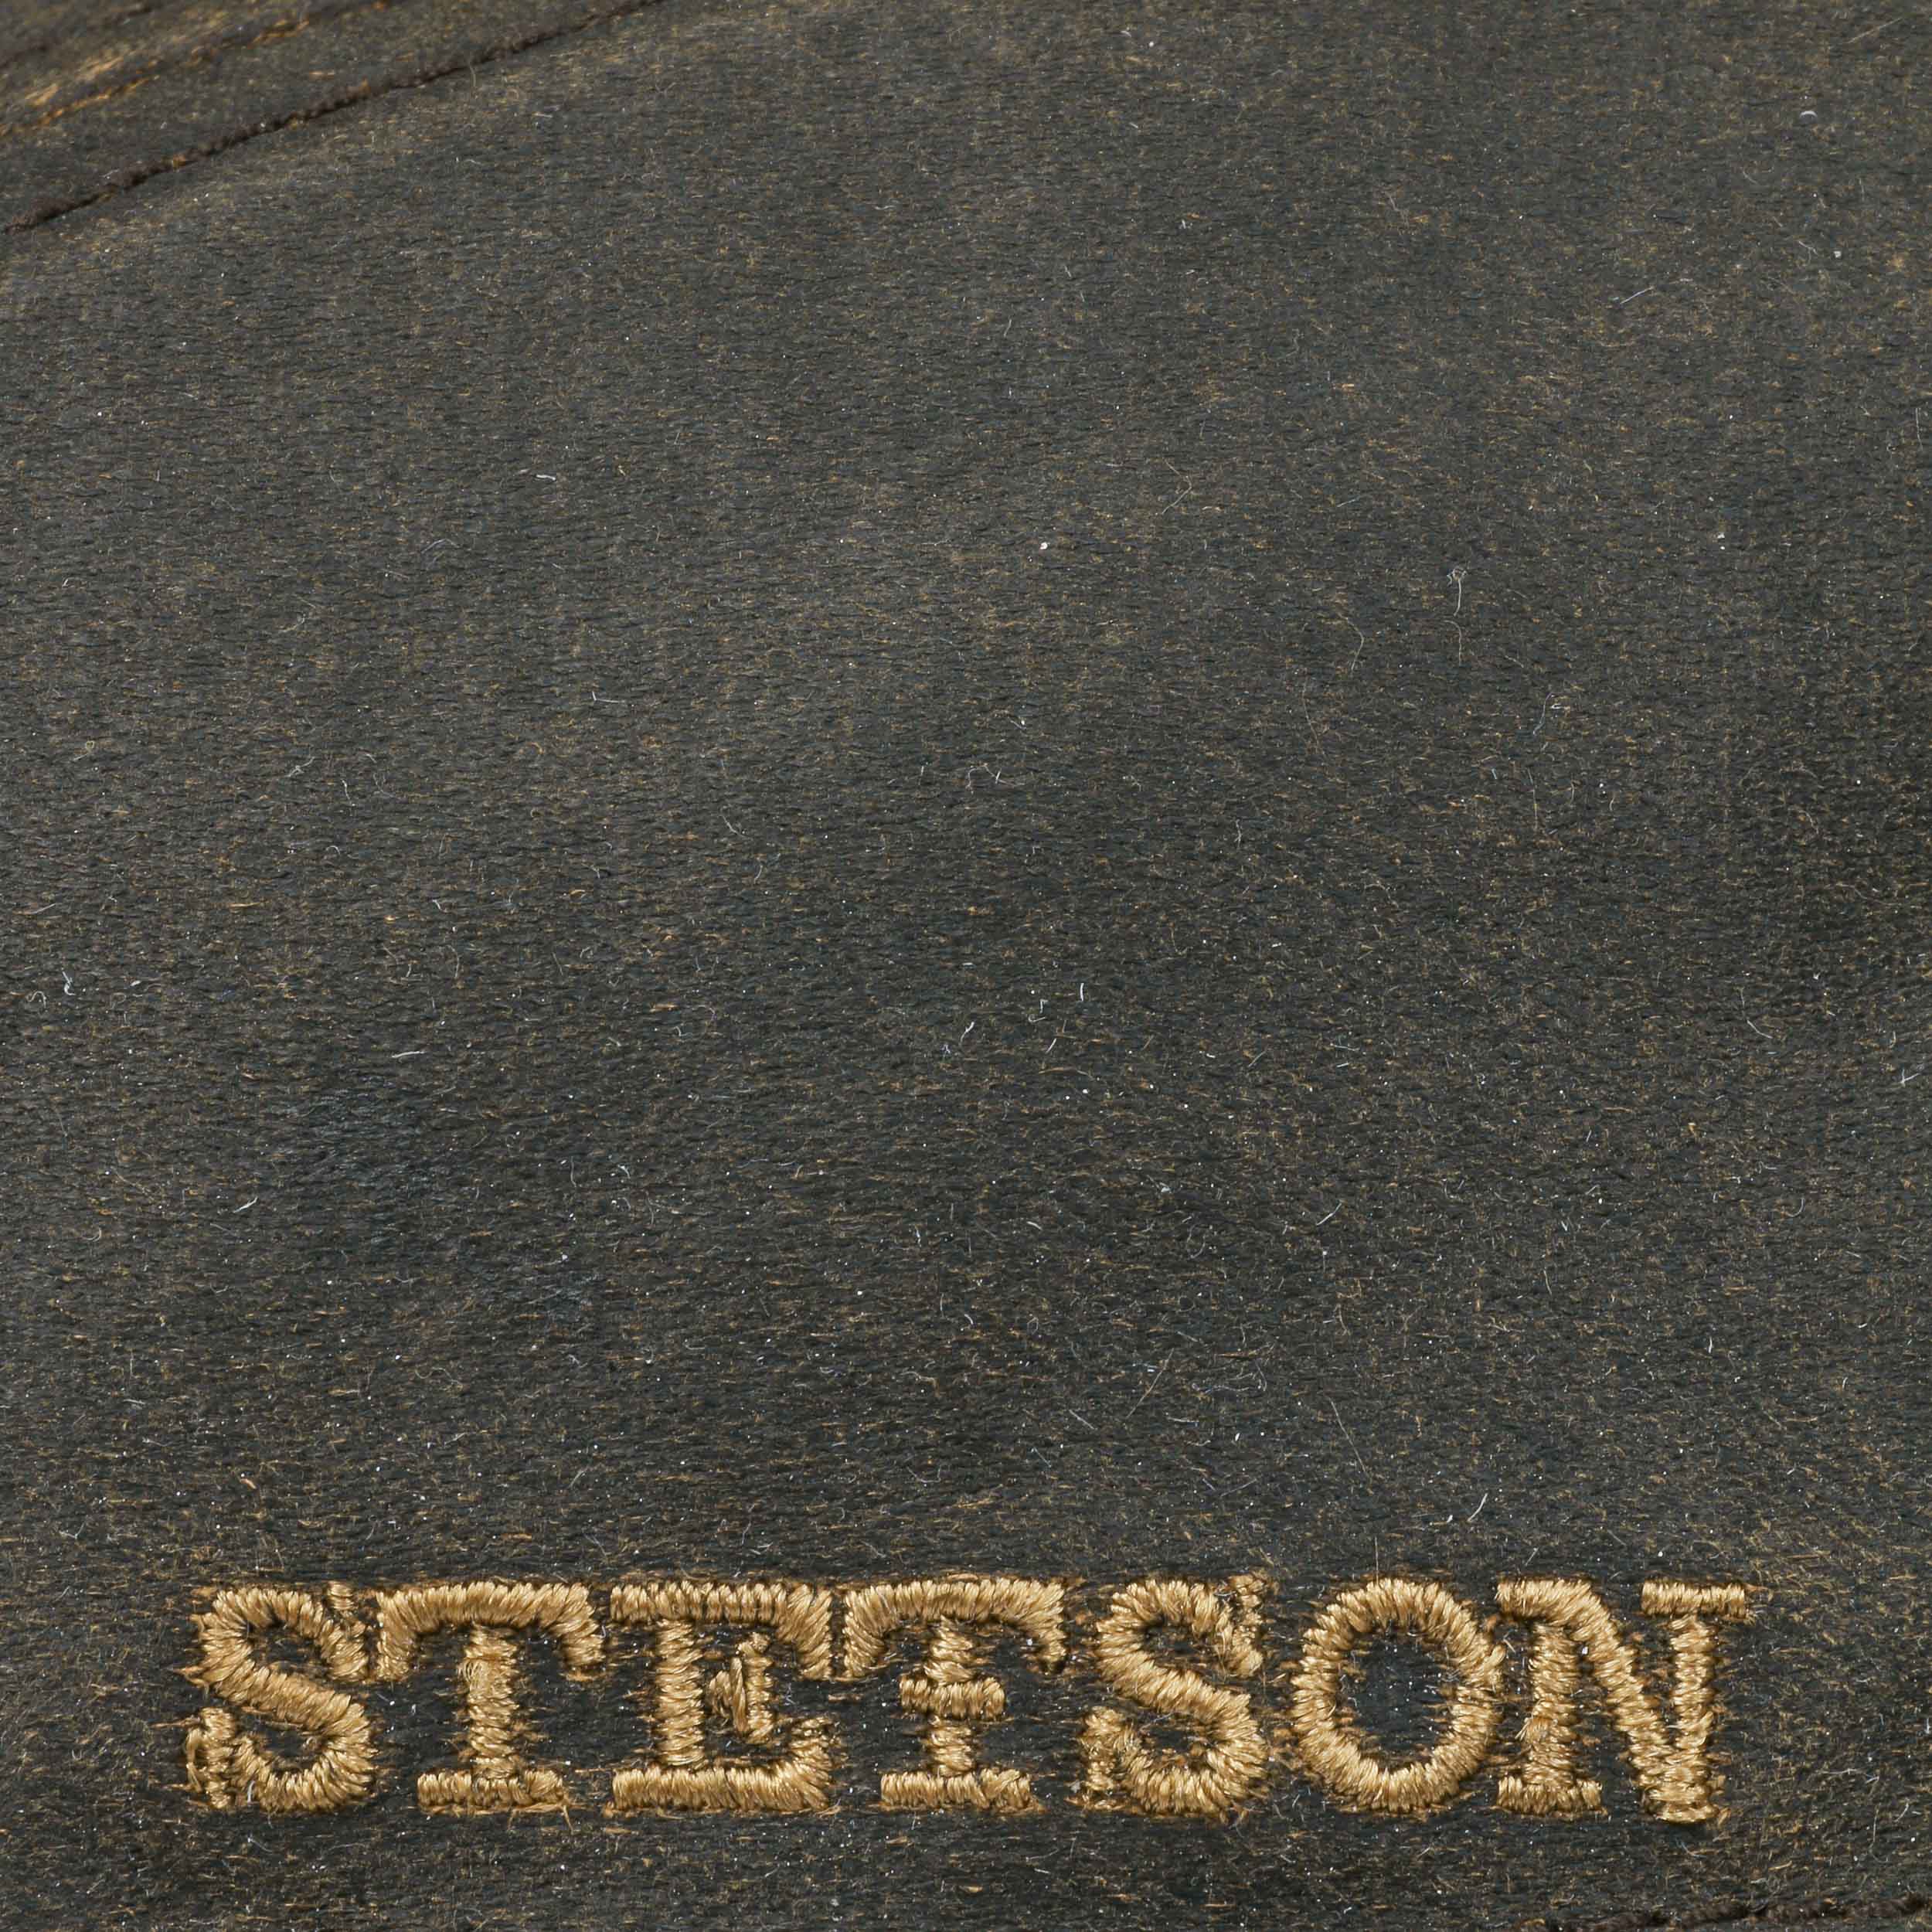 Madison Old Cotton Flat Cap by Stetson - 59,00